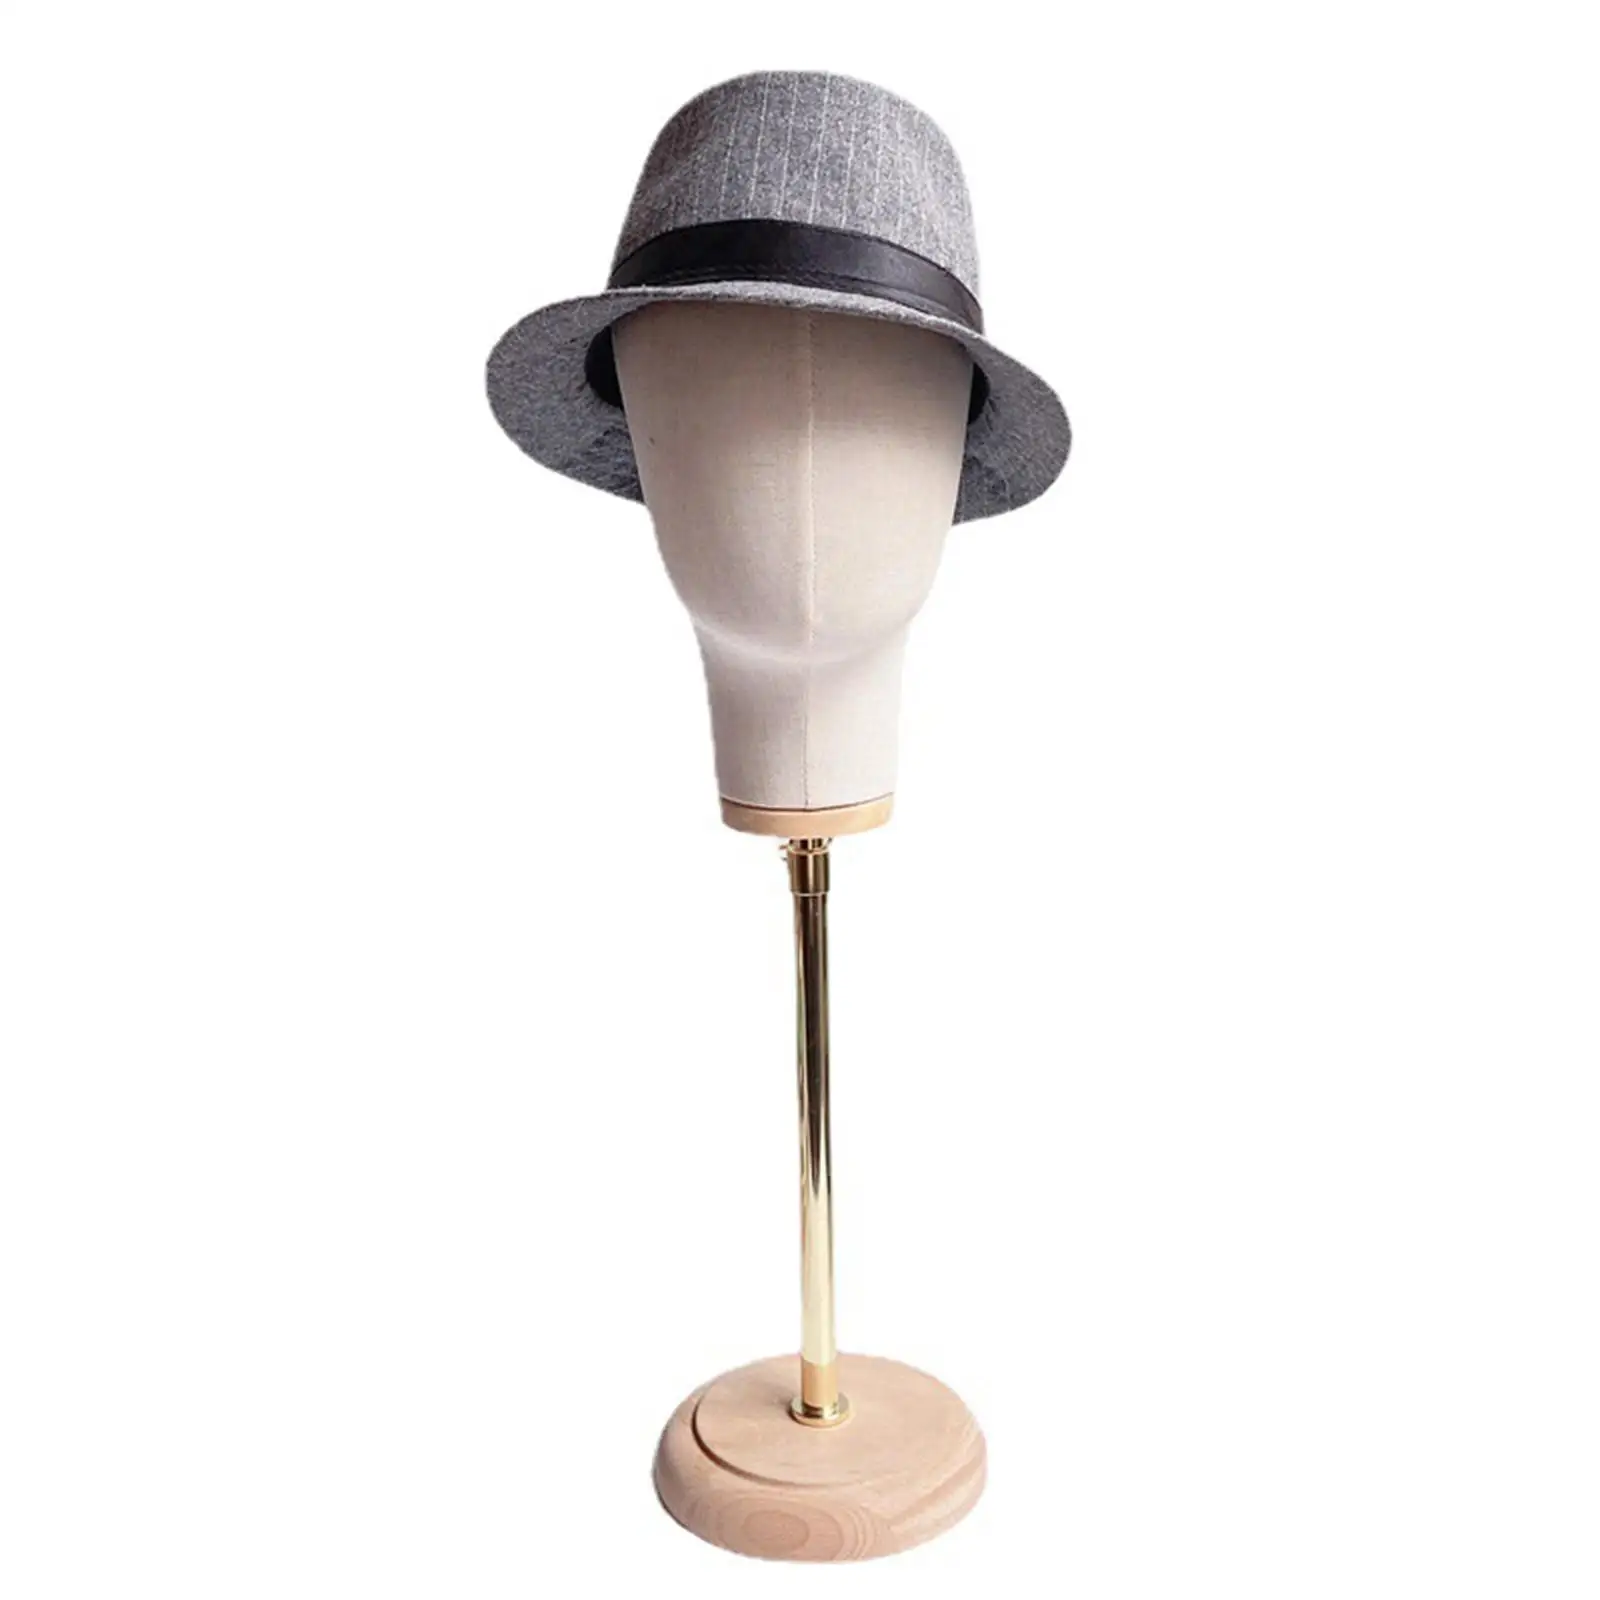 Hat Display Stand Manikin Head Tabletop Hat Display Holders for Styling Home Use